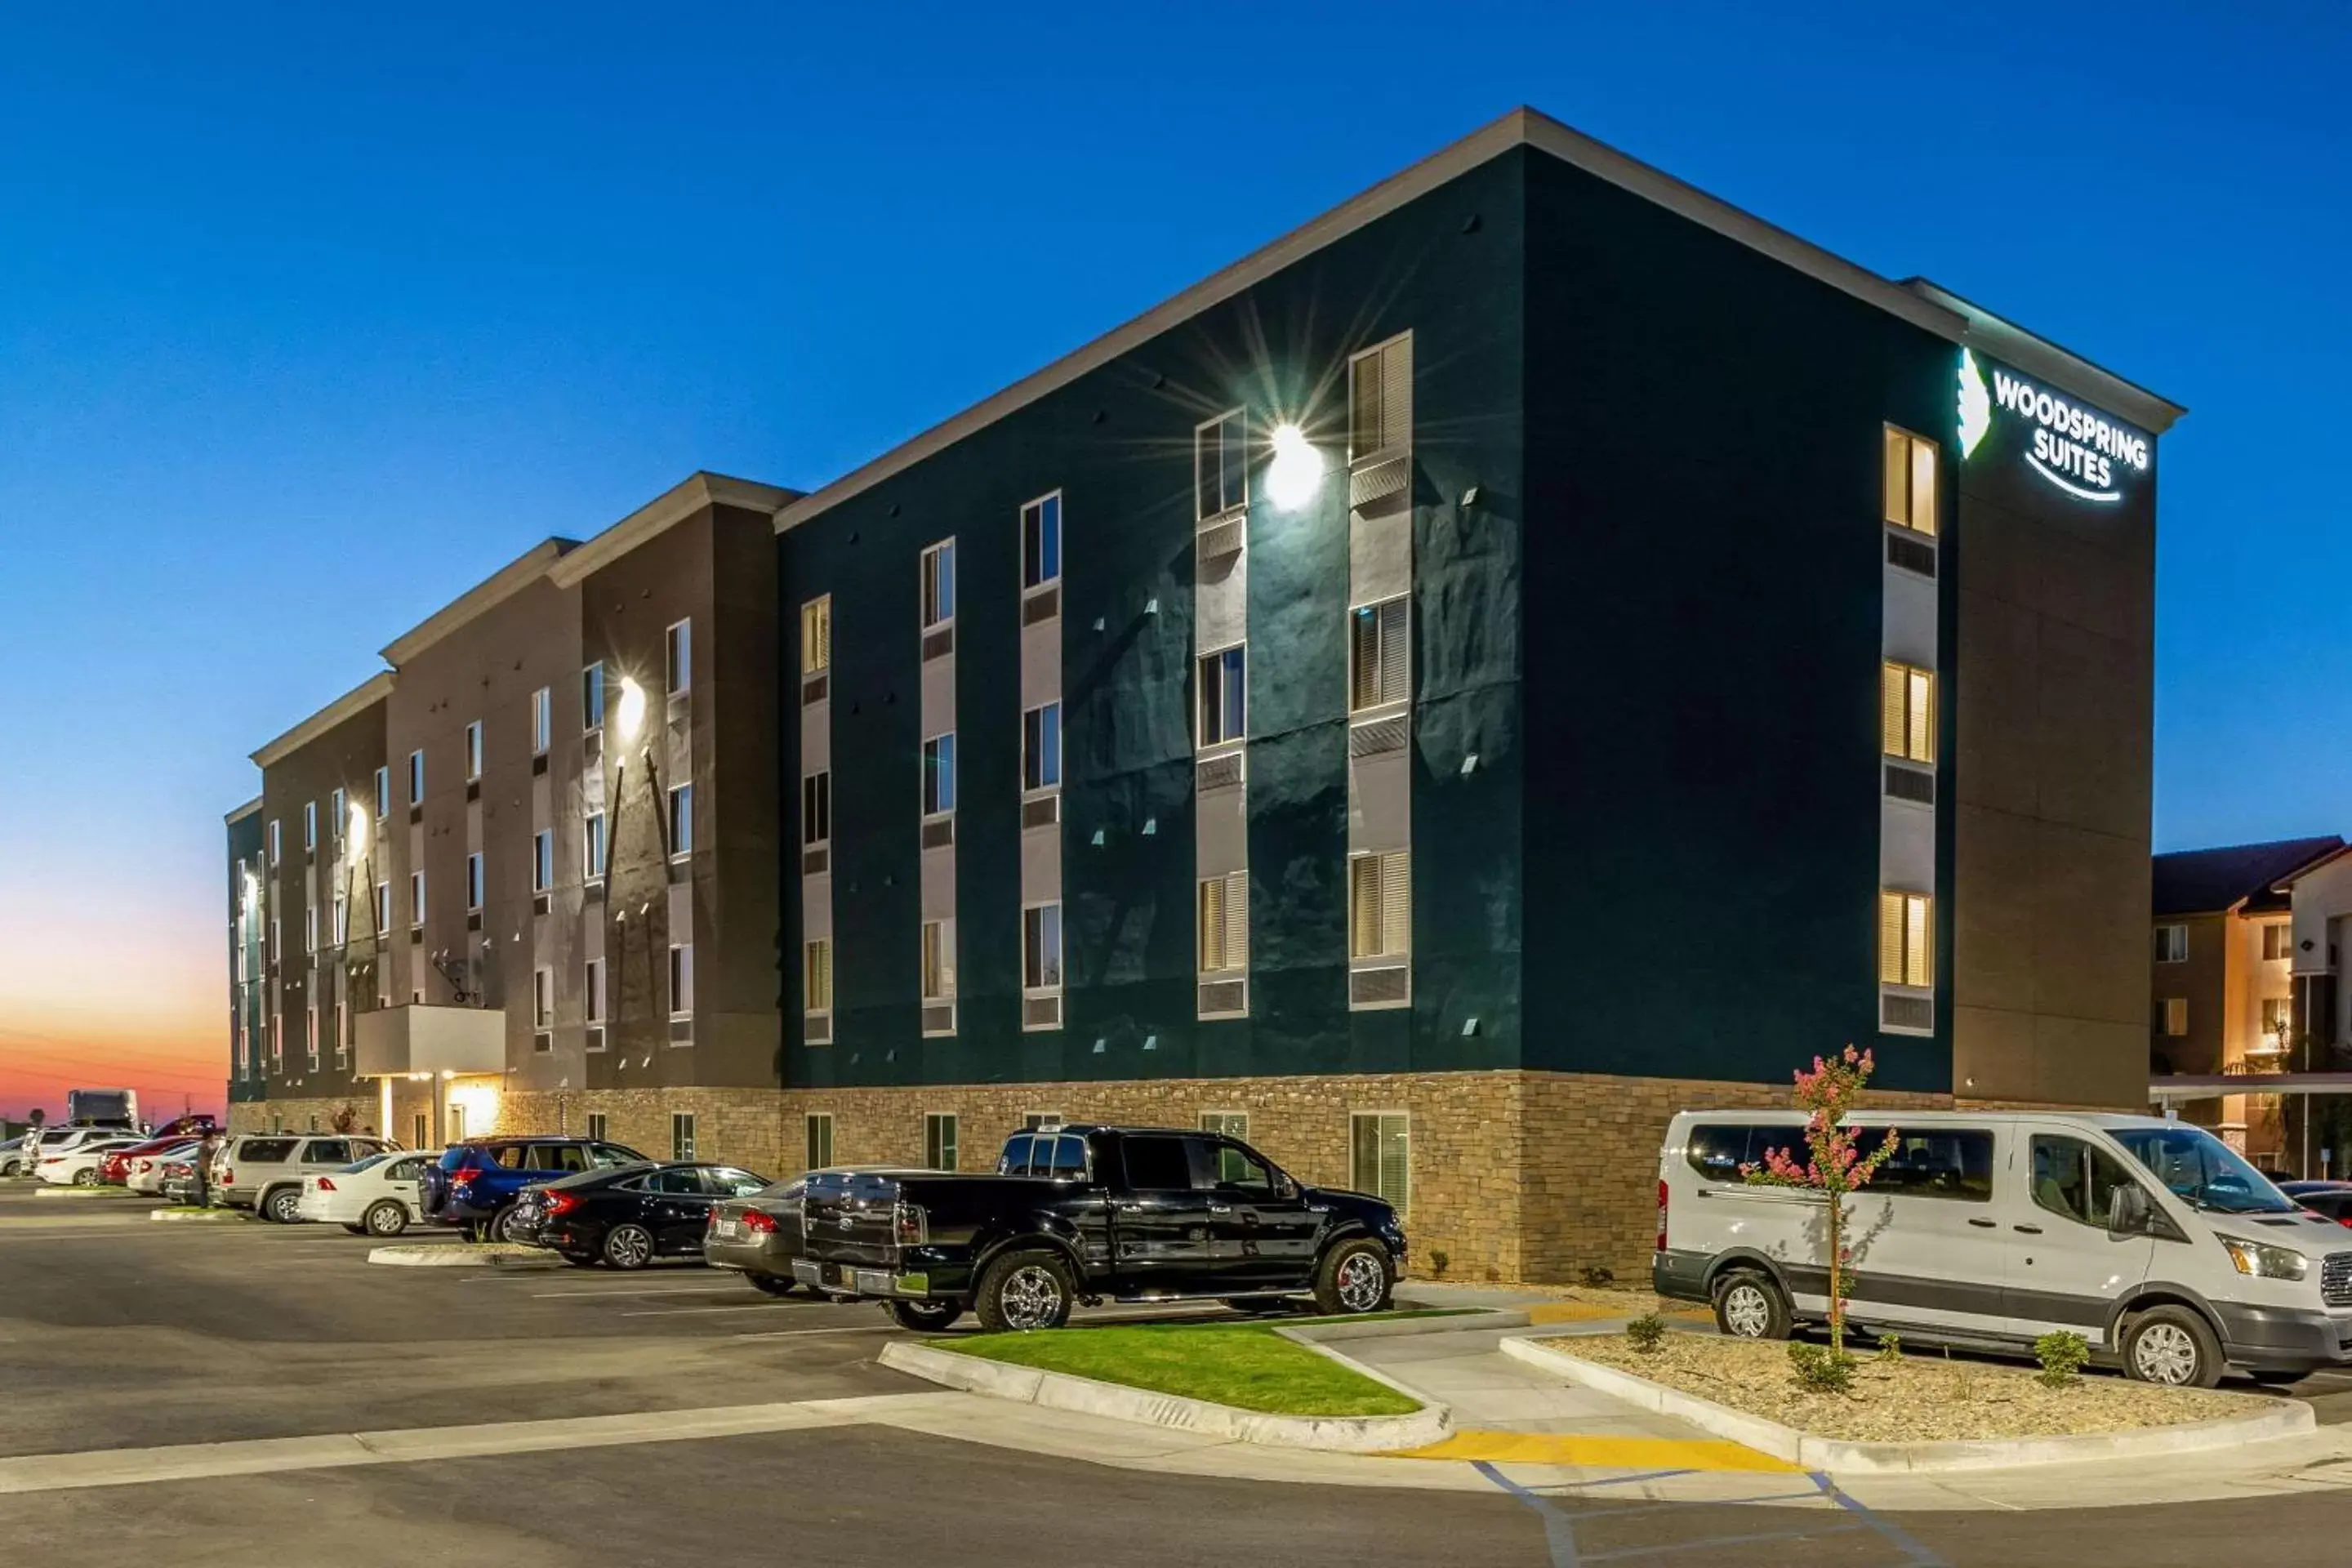 Other, Property Building in WoodSpring Suites Bakersfield Airport